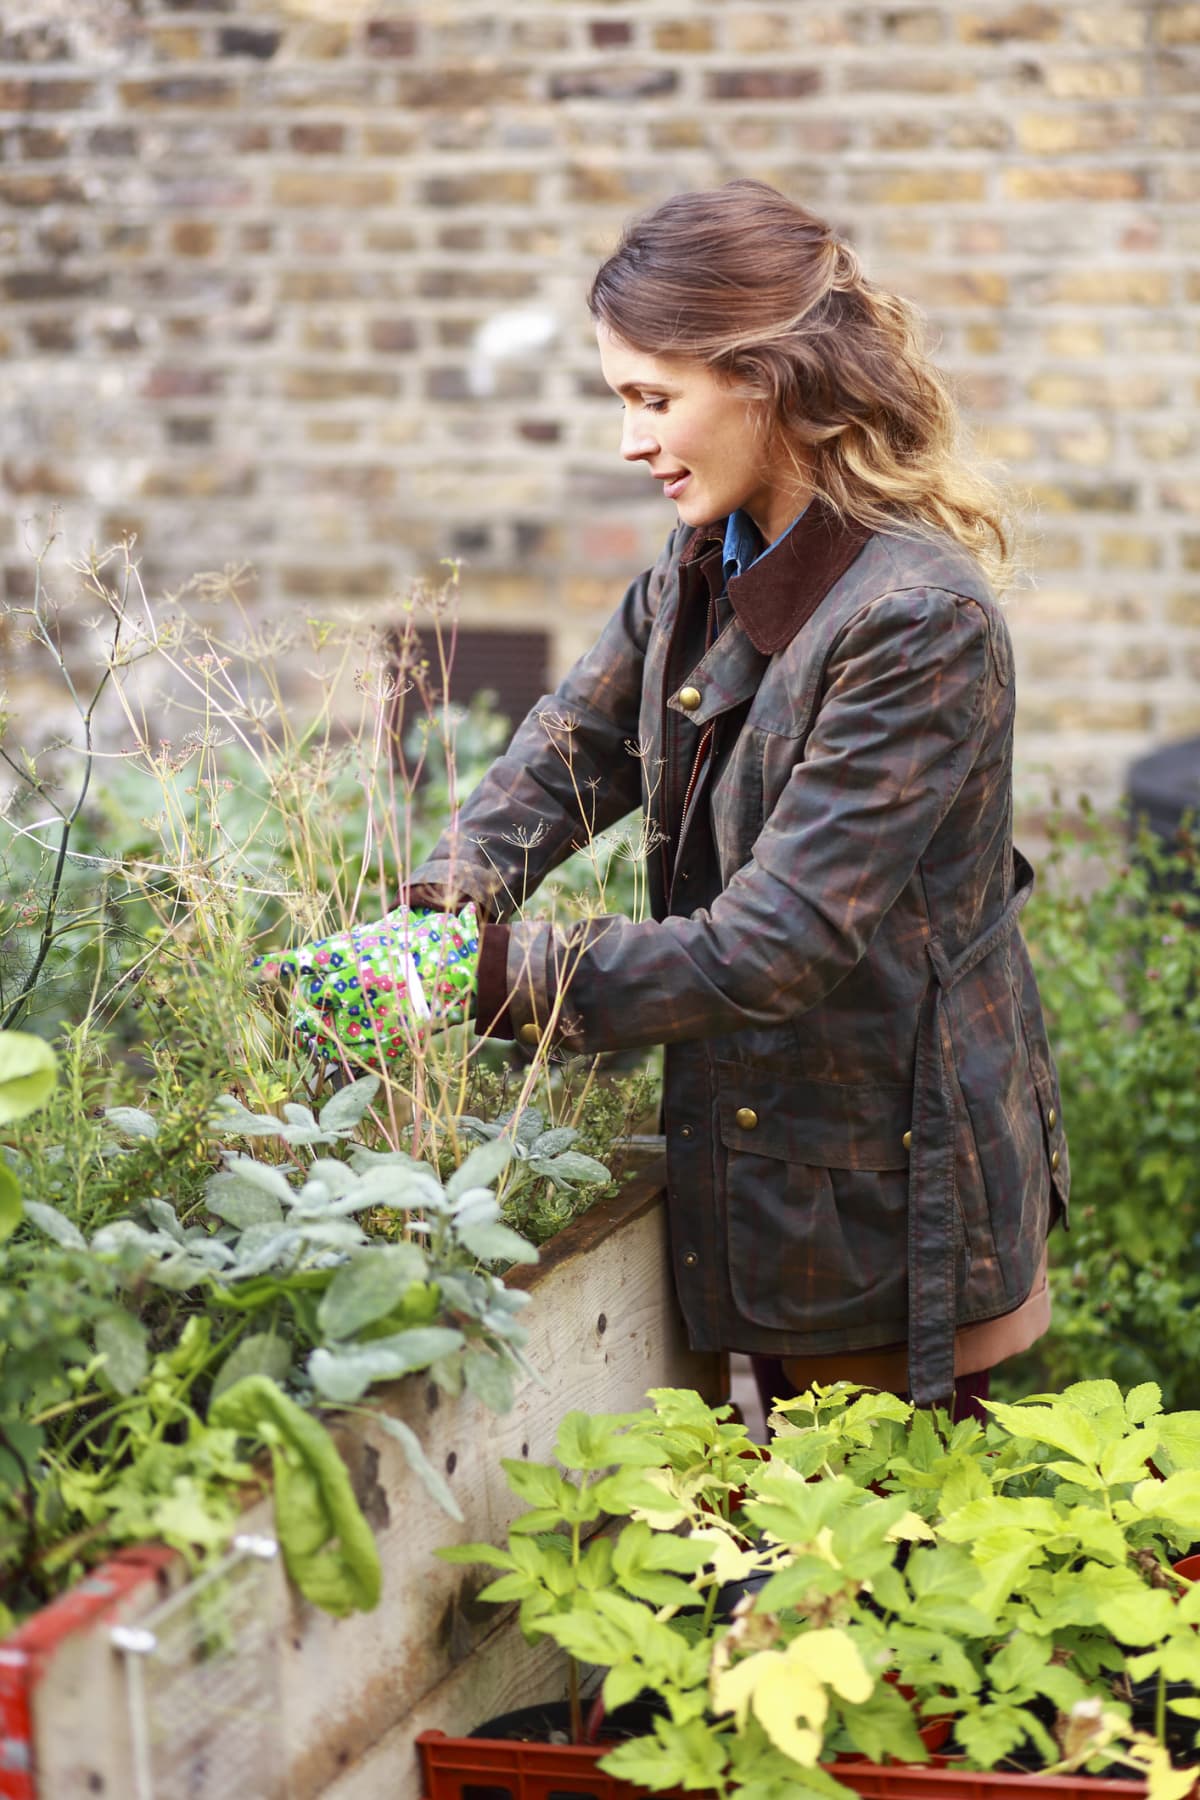 Young woman potting plants in her city garden.